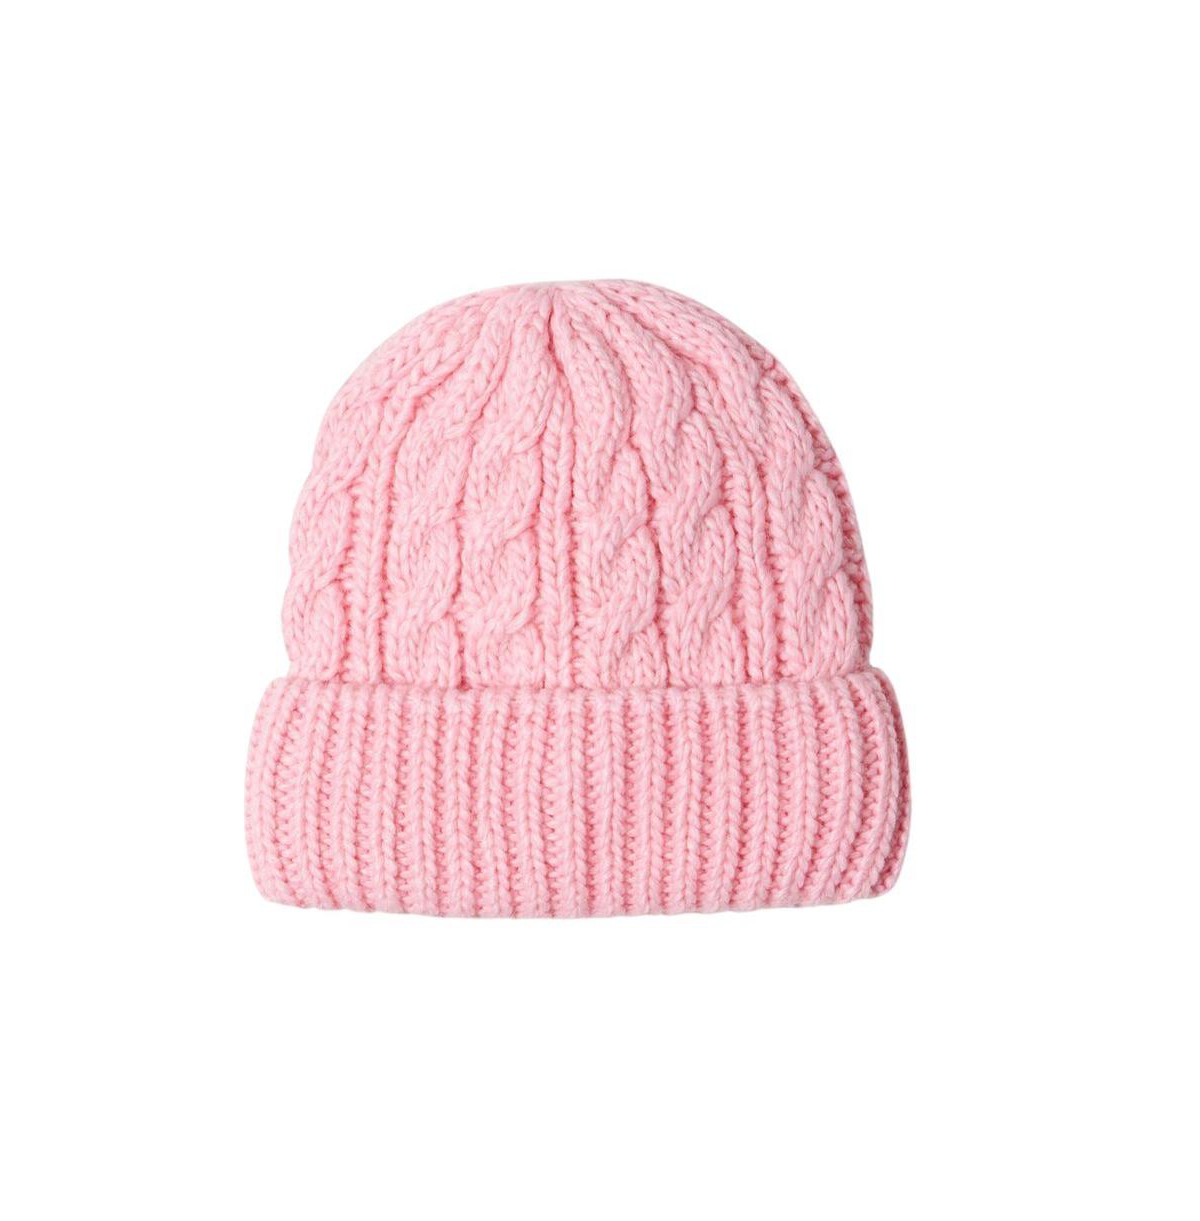 Women's Winter Cable Knitted Beanie Hat with Fleece Lining - Pastel blue